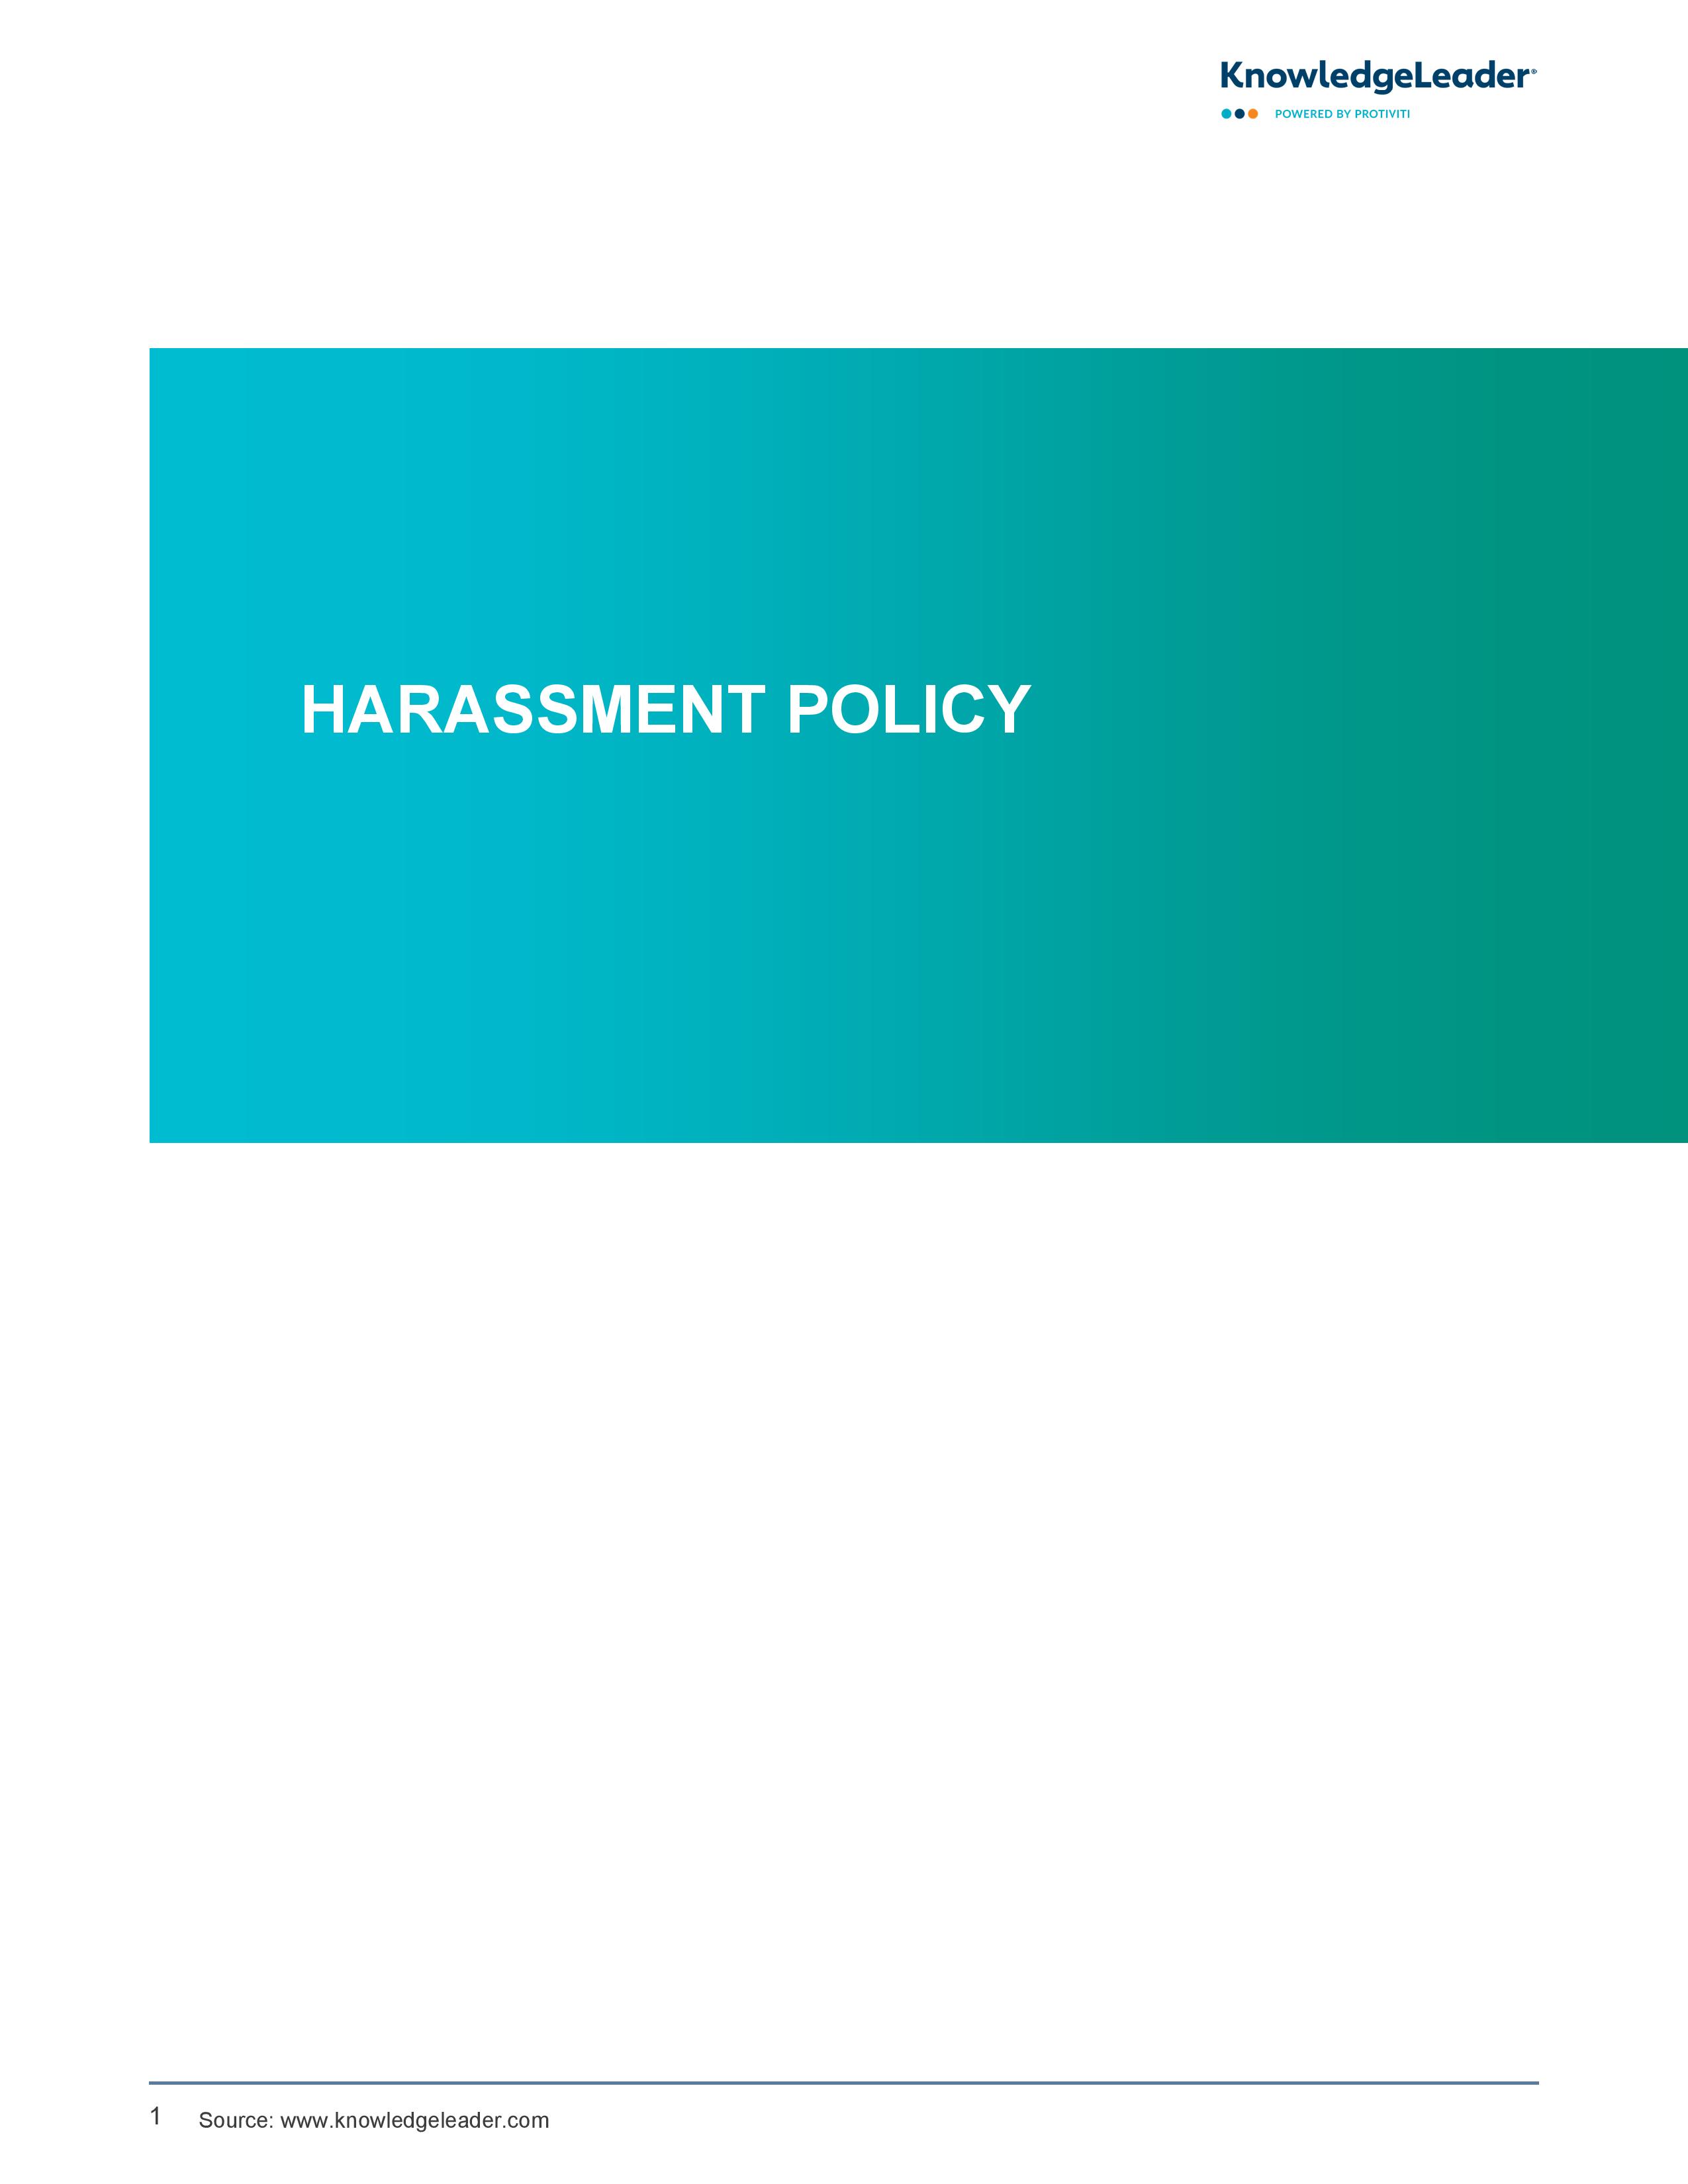 Screenshot of the first page of Harassment Policy